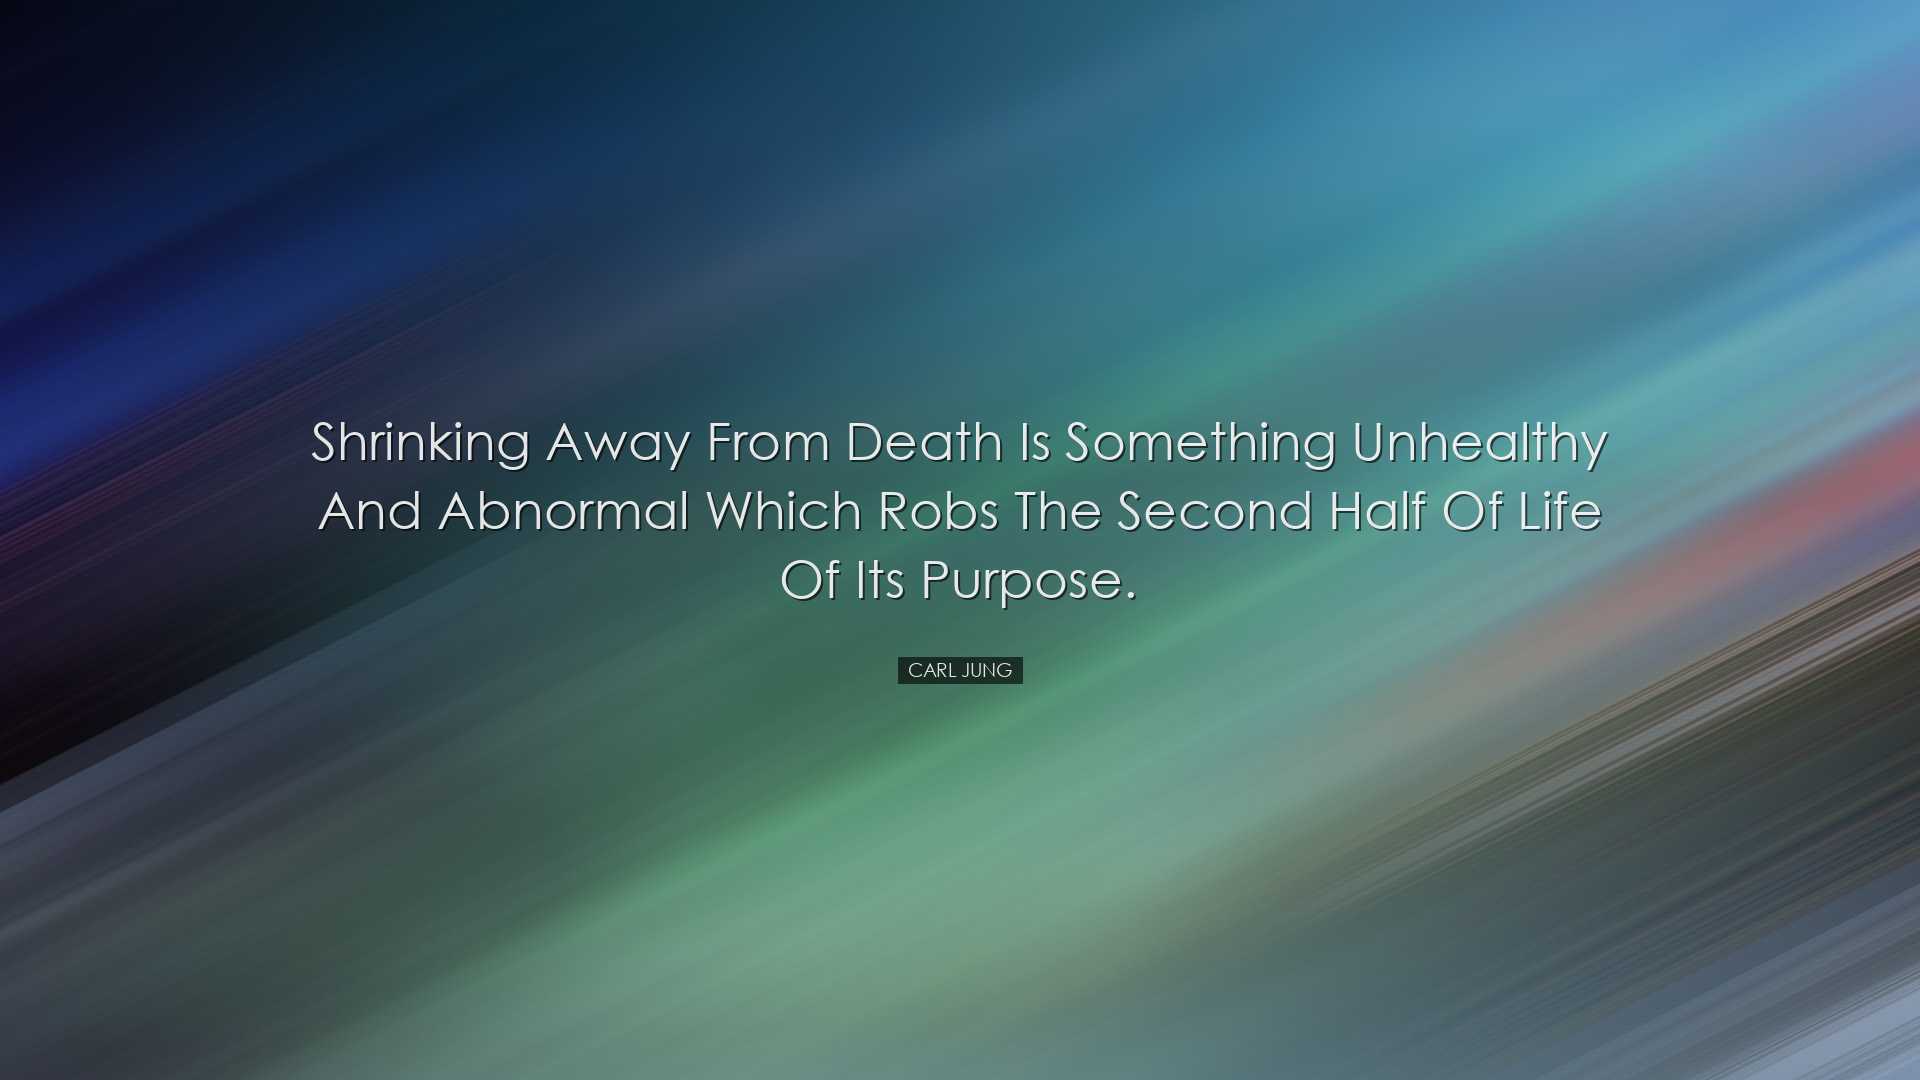 Shrinking away from death is something unhealthy and abnormal whic